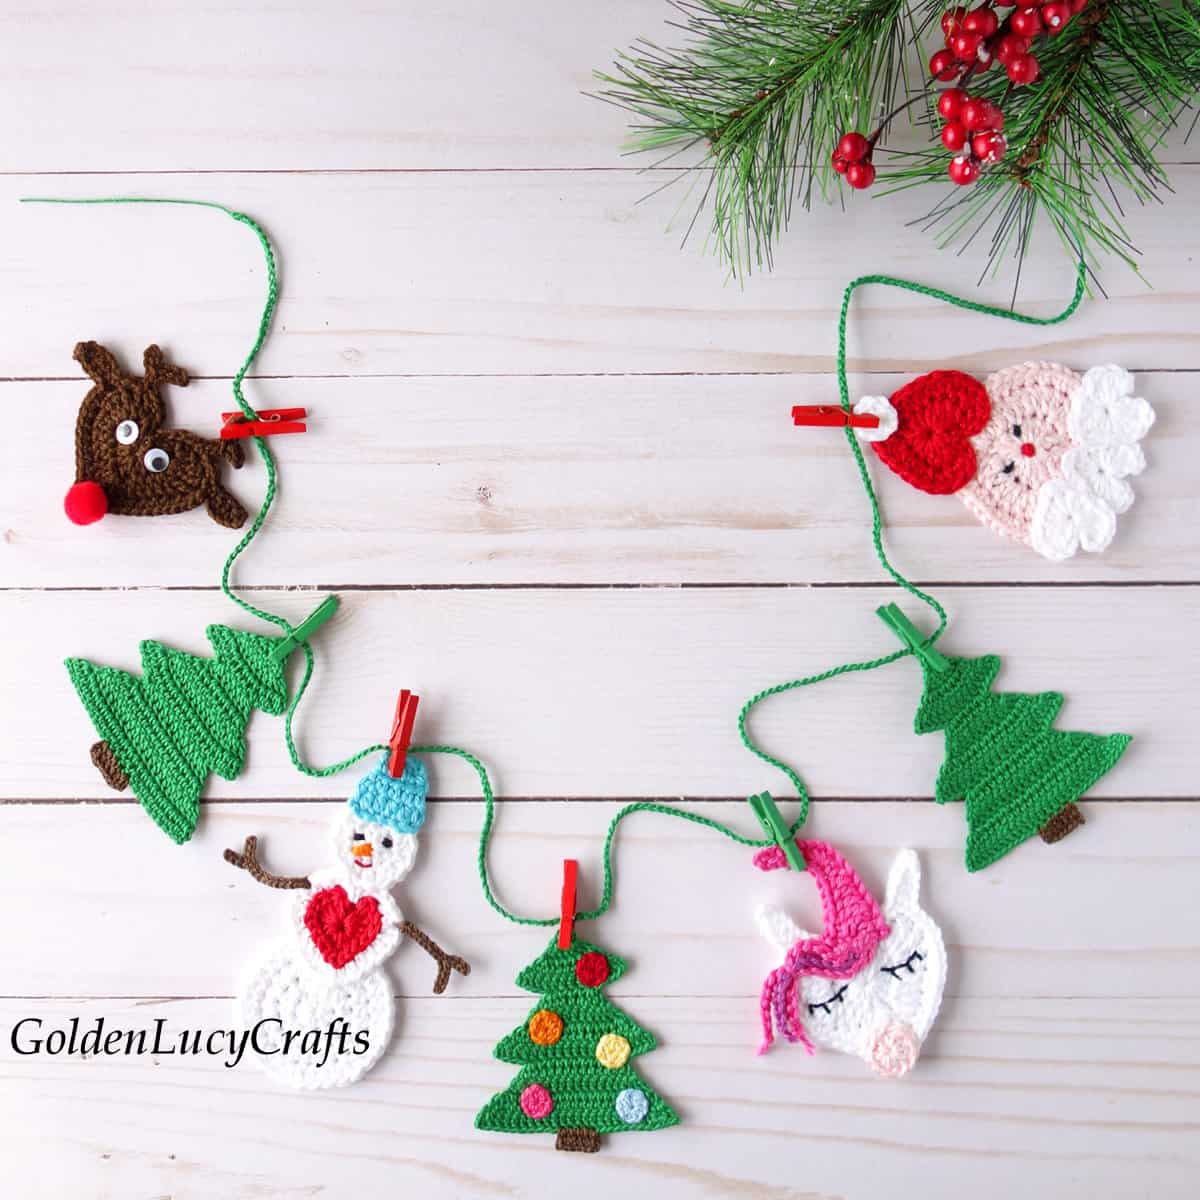 Crochet Christmas garland made from crocheted appliques.